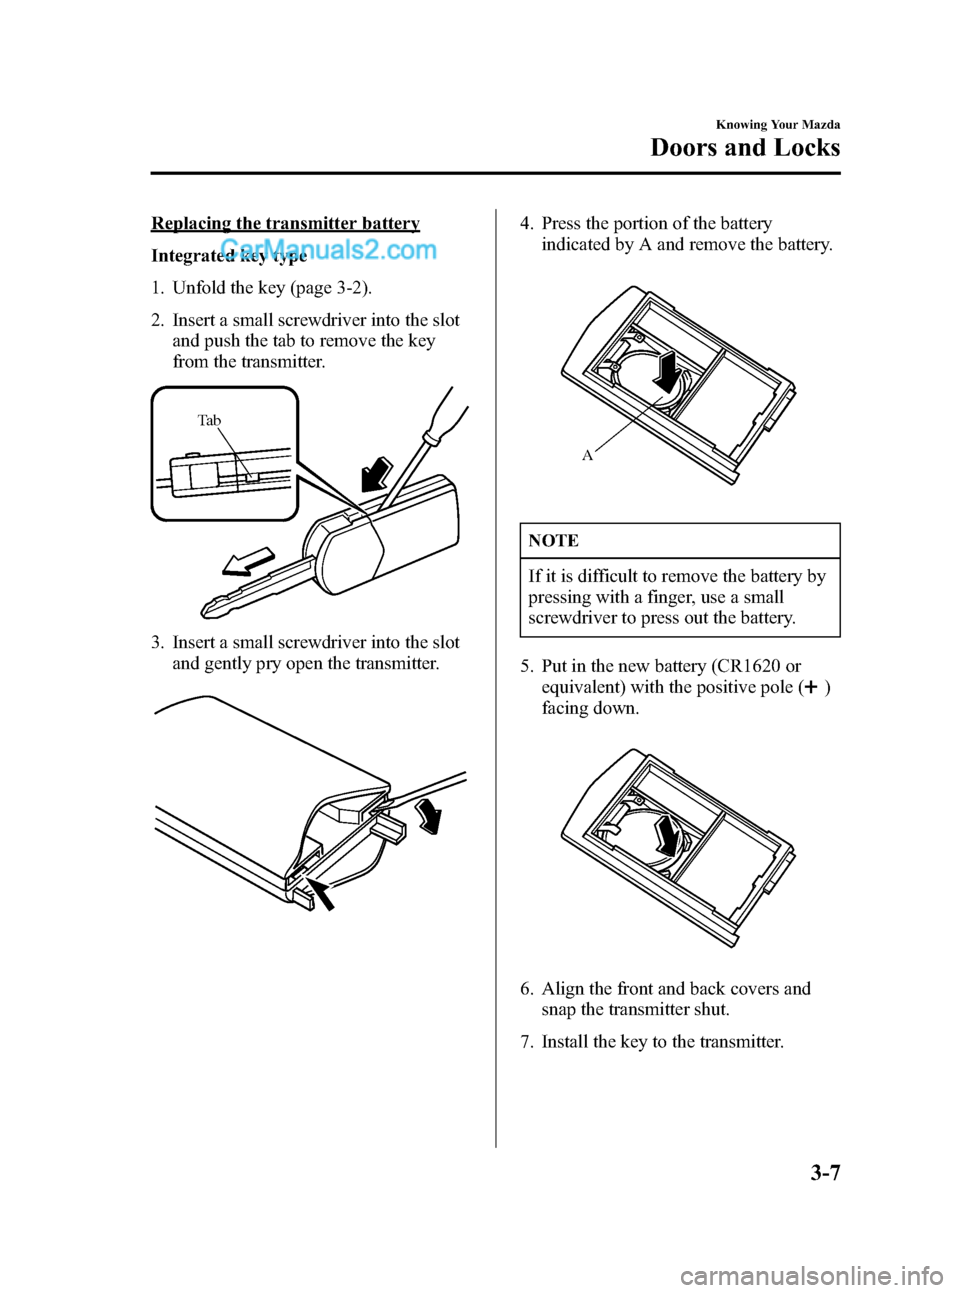 MAZDA MODEL MAZDASPEED 3 2007  Owners Manual (in English) Black plate (81,1)
Replacing the transmitter battery
Integrated key type
1. Unfold the key (page 3-2).
2. Insert a small screwdriver into the slot
and push the tab to remove the key
from the transmitt